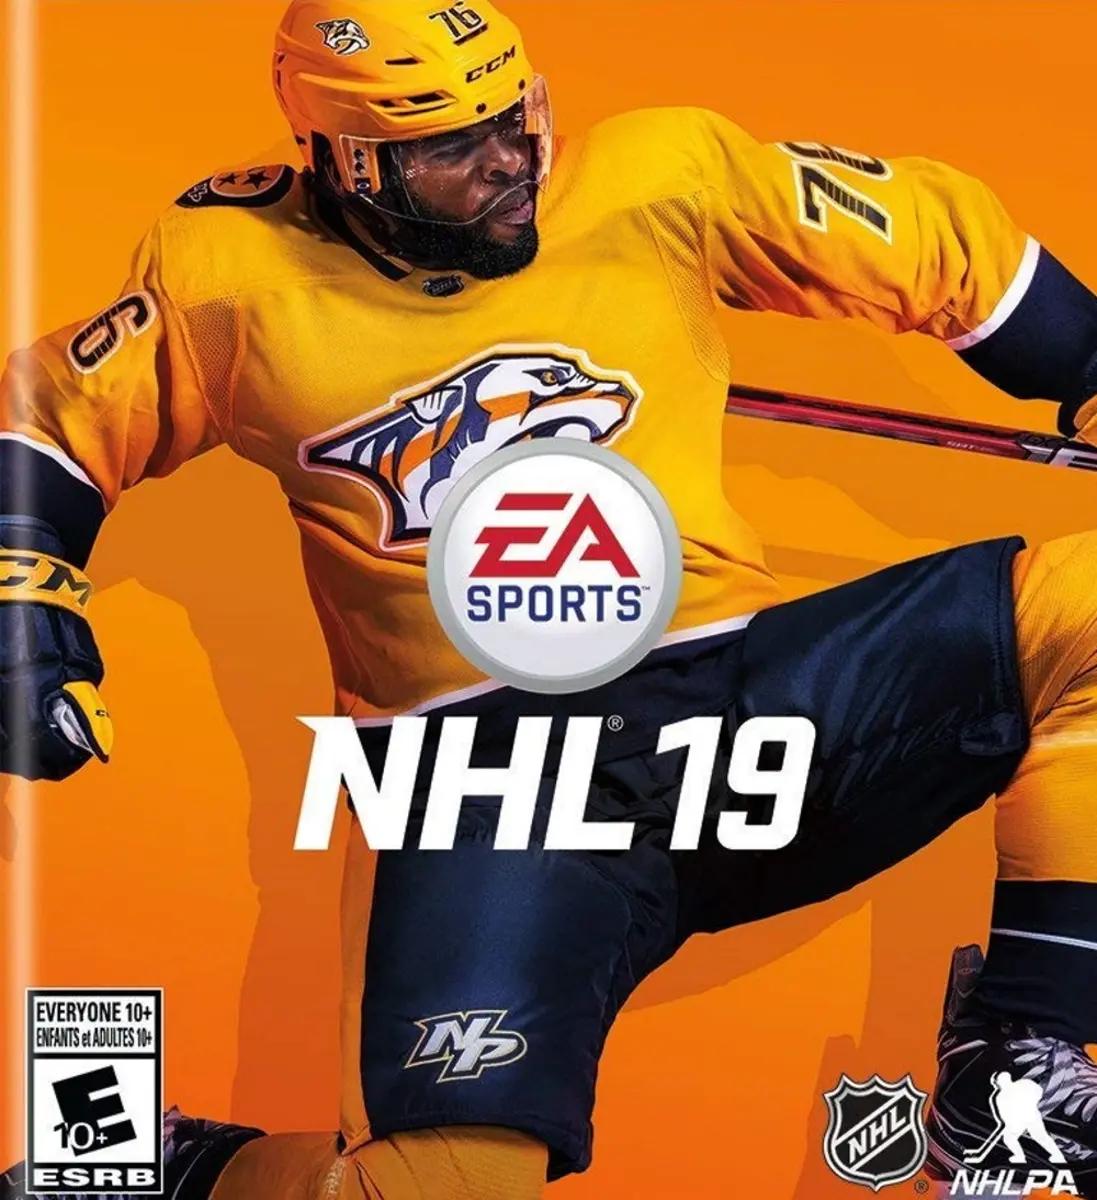 P.K. Subban on the NHL 19 cover.